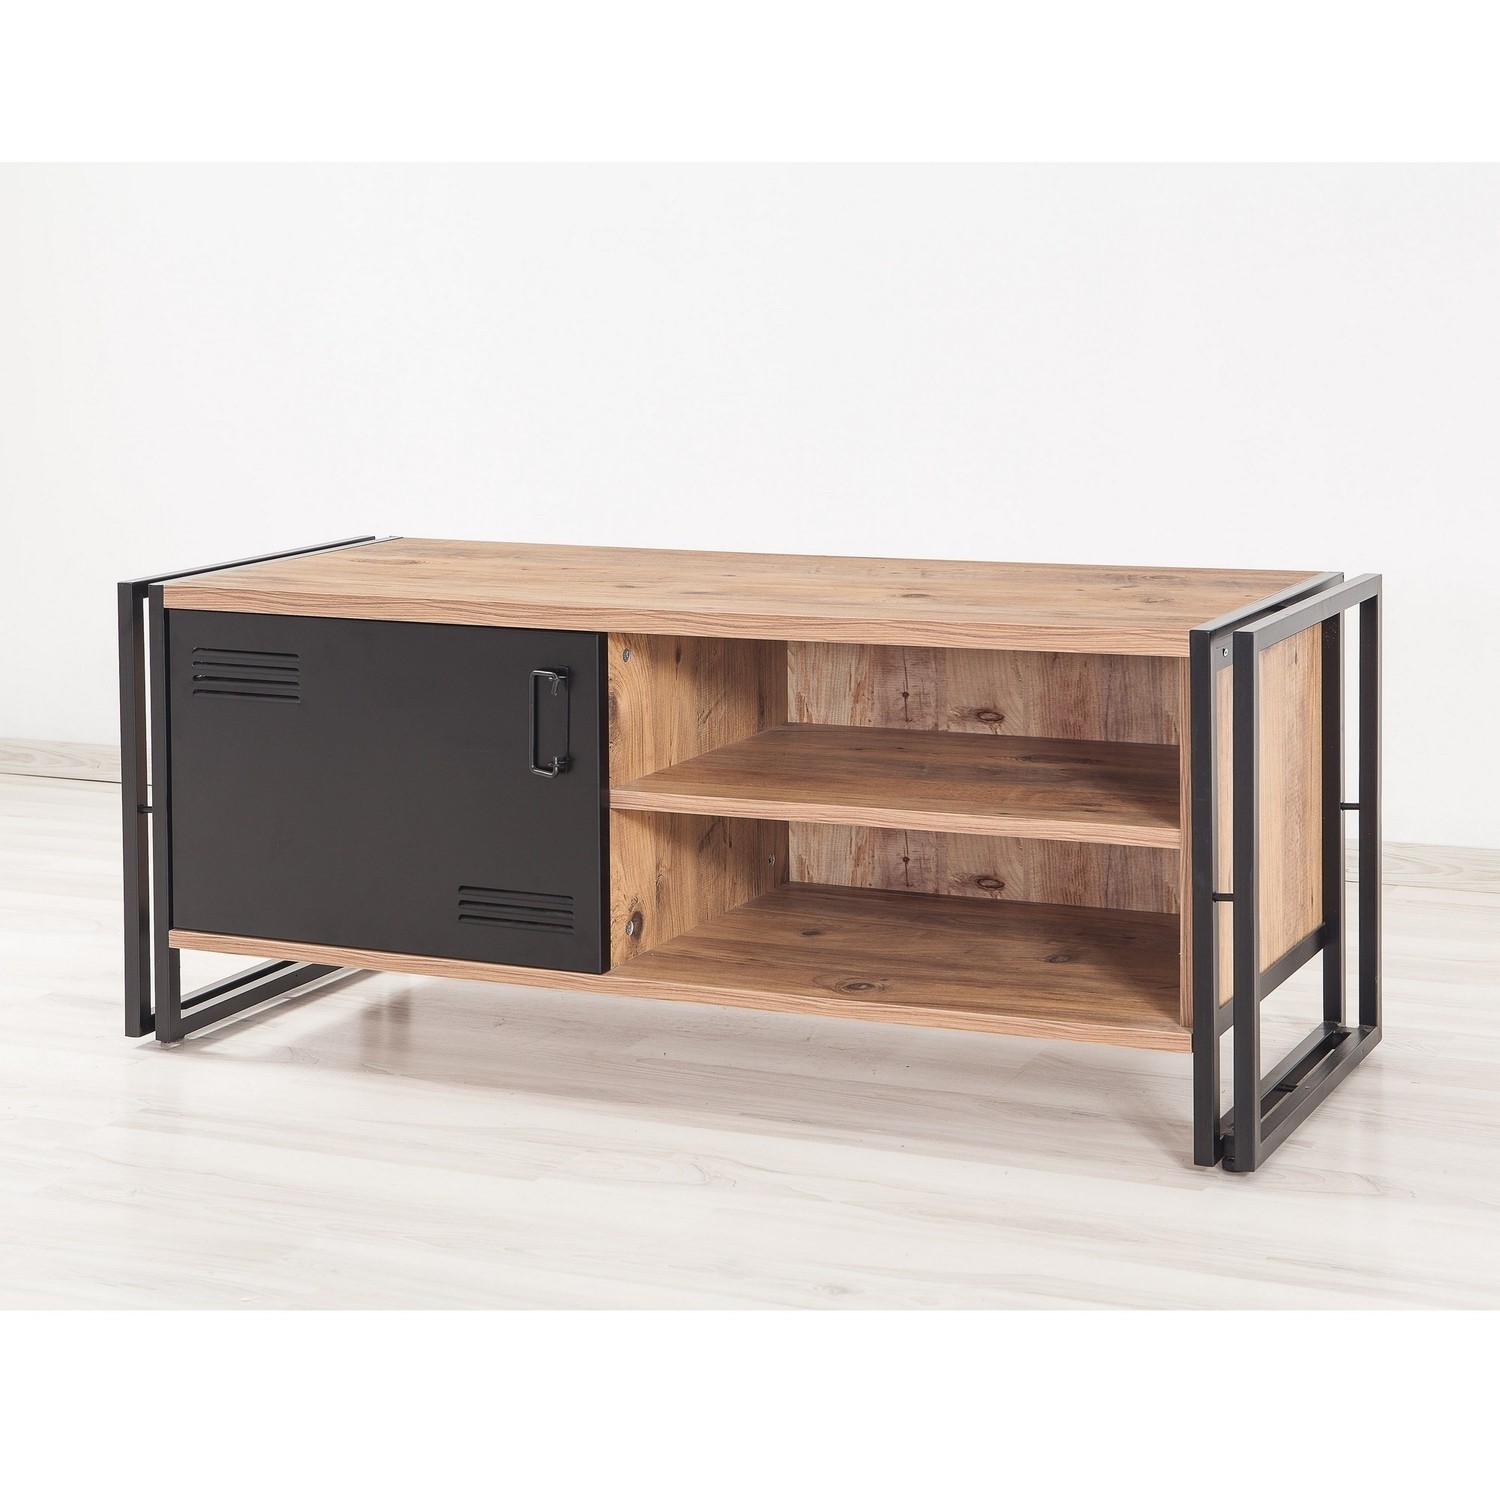 Featured image of post Industrial Black Metal Tv Stand / Check out our industrial tv stand selection for the very best in unique or custom, handmade pieces from our console tables &amp; cabinets shops.